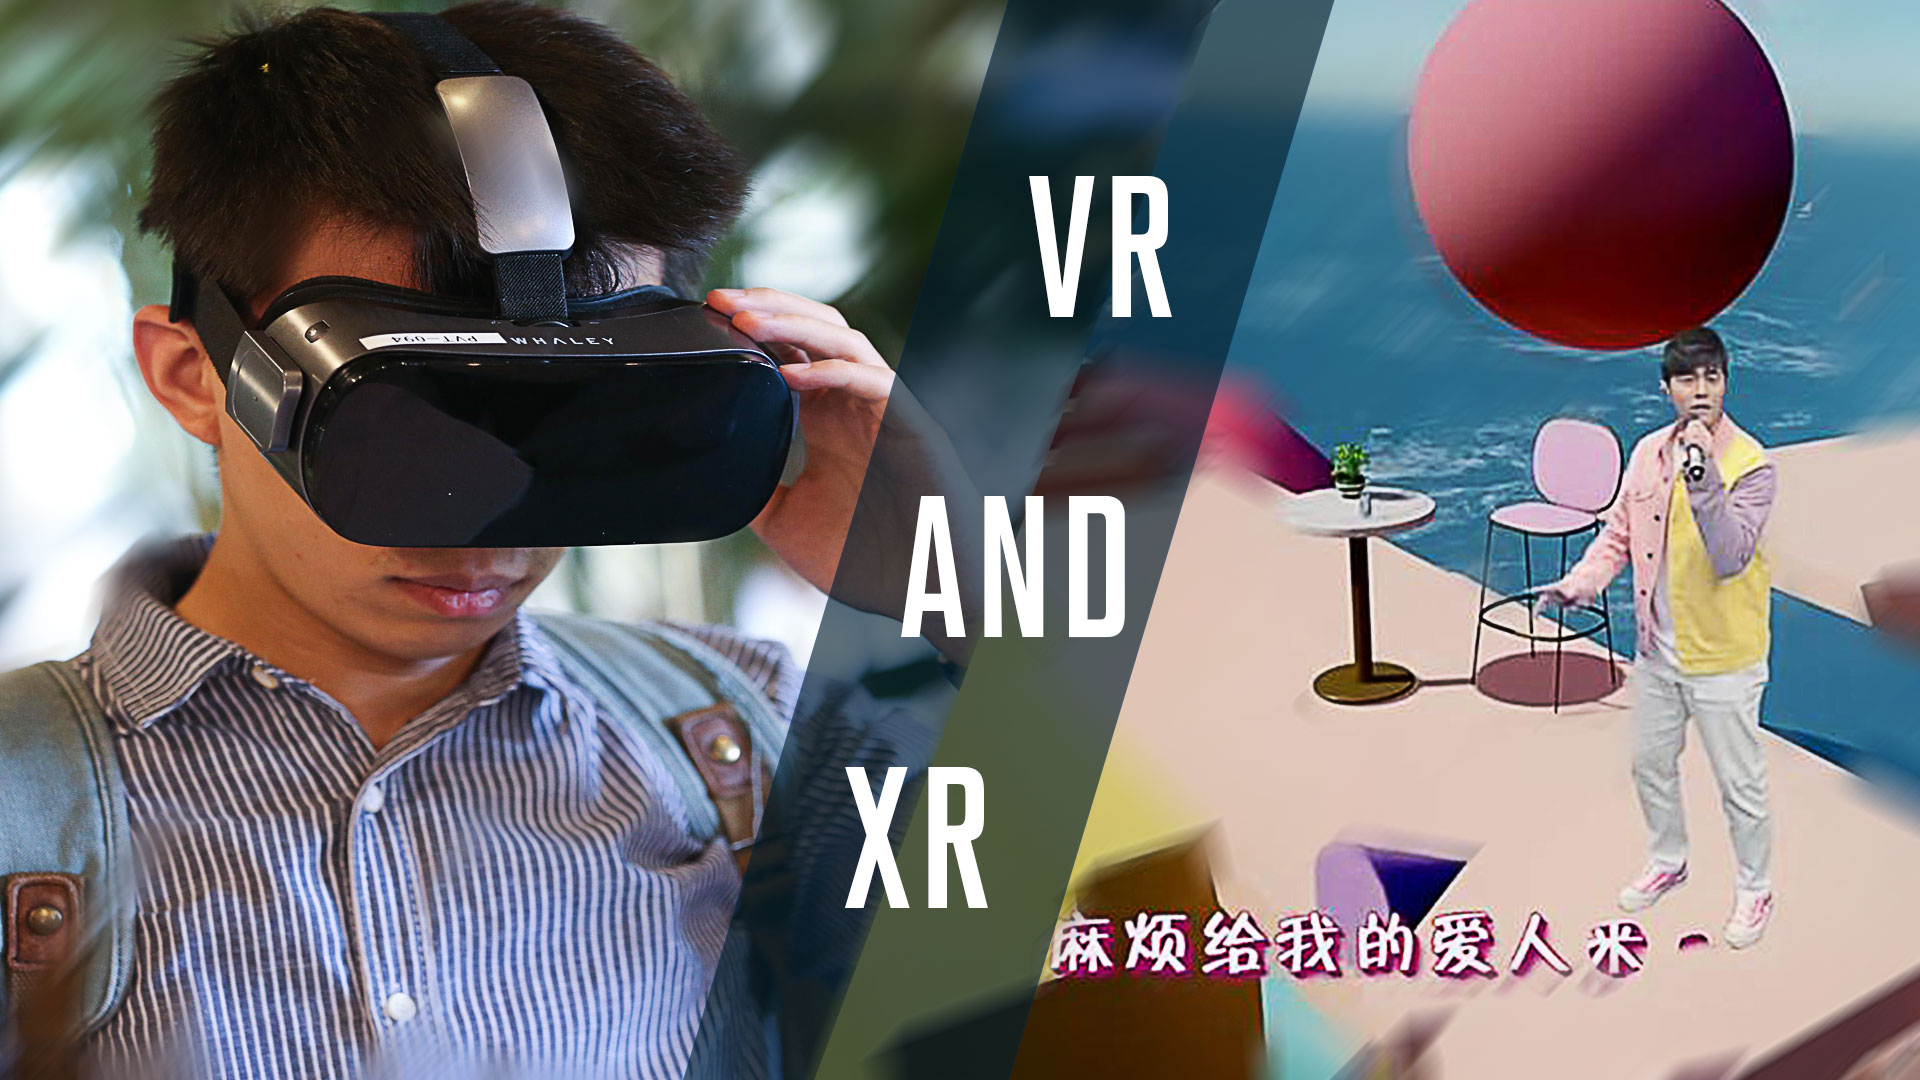 VR AND XR